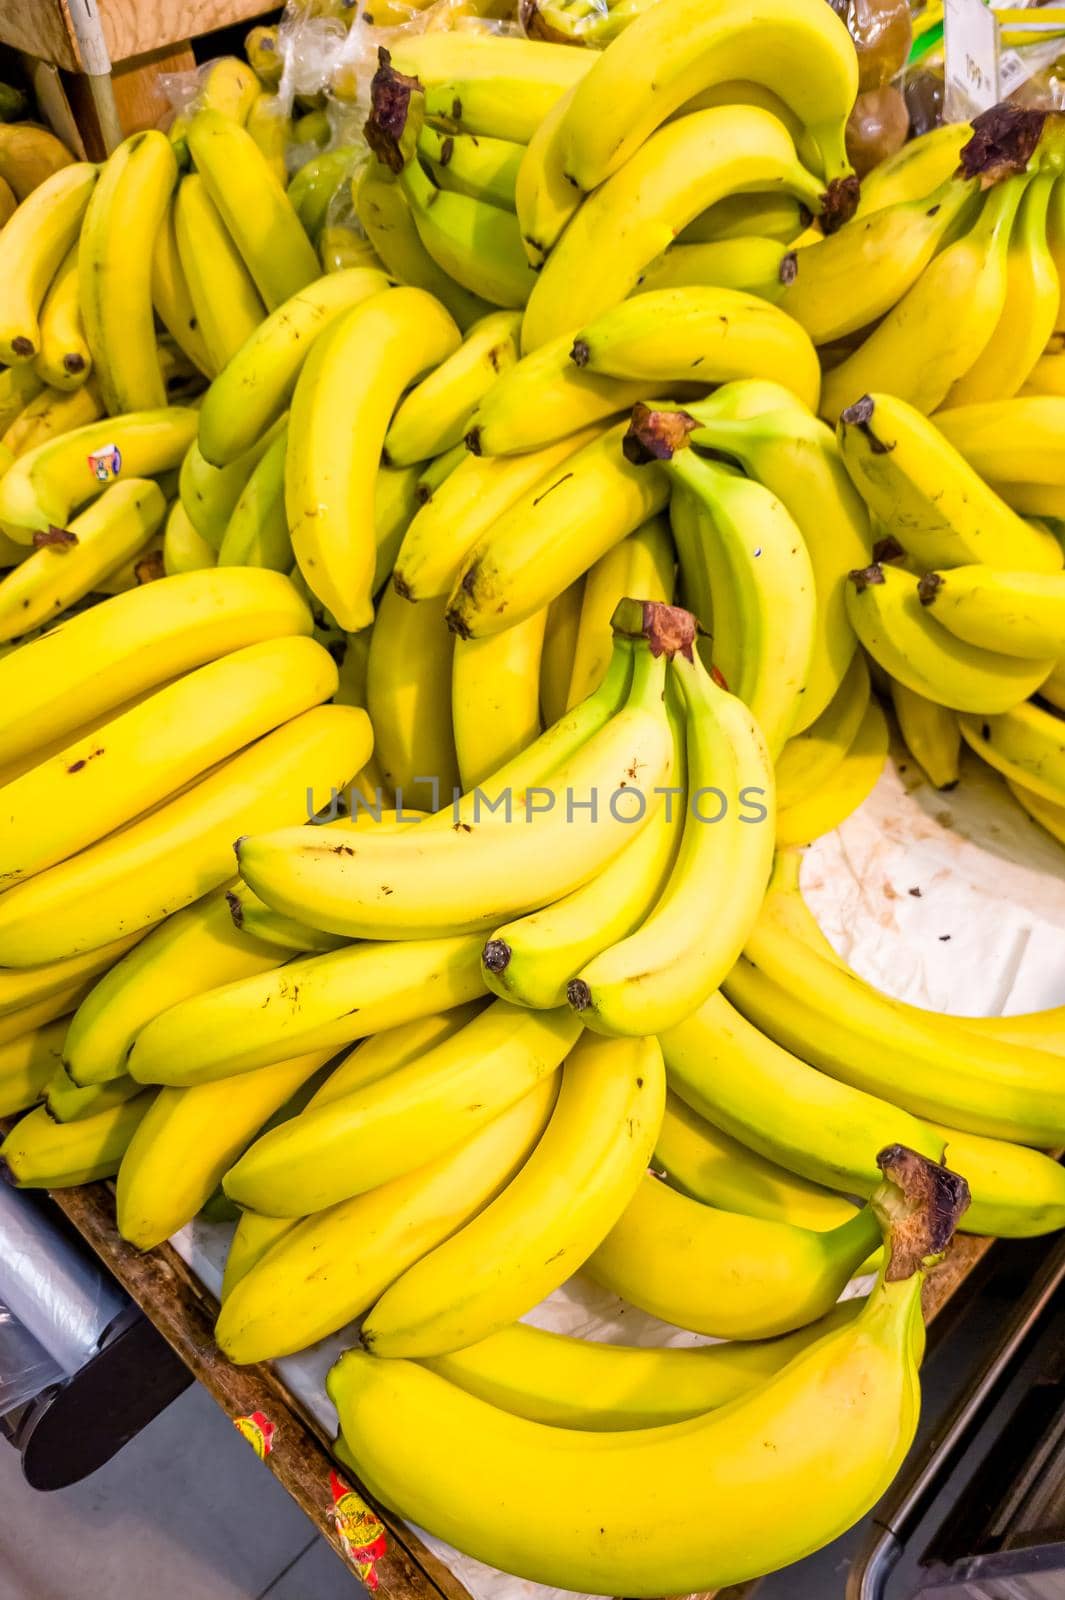 Yellow bananas are on the shelf of the store by Milanchikov